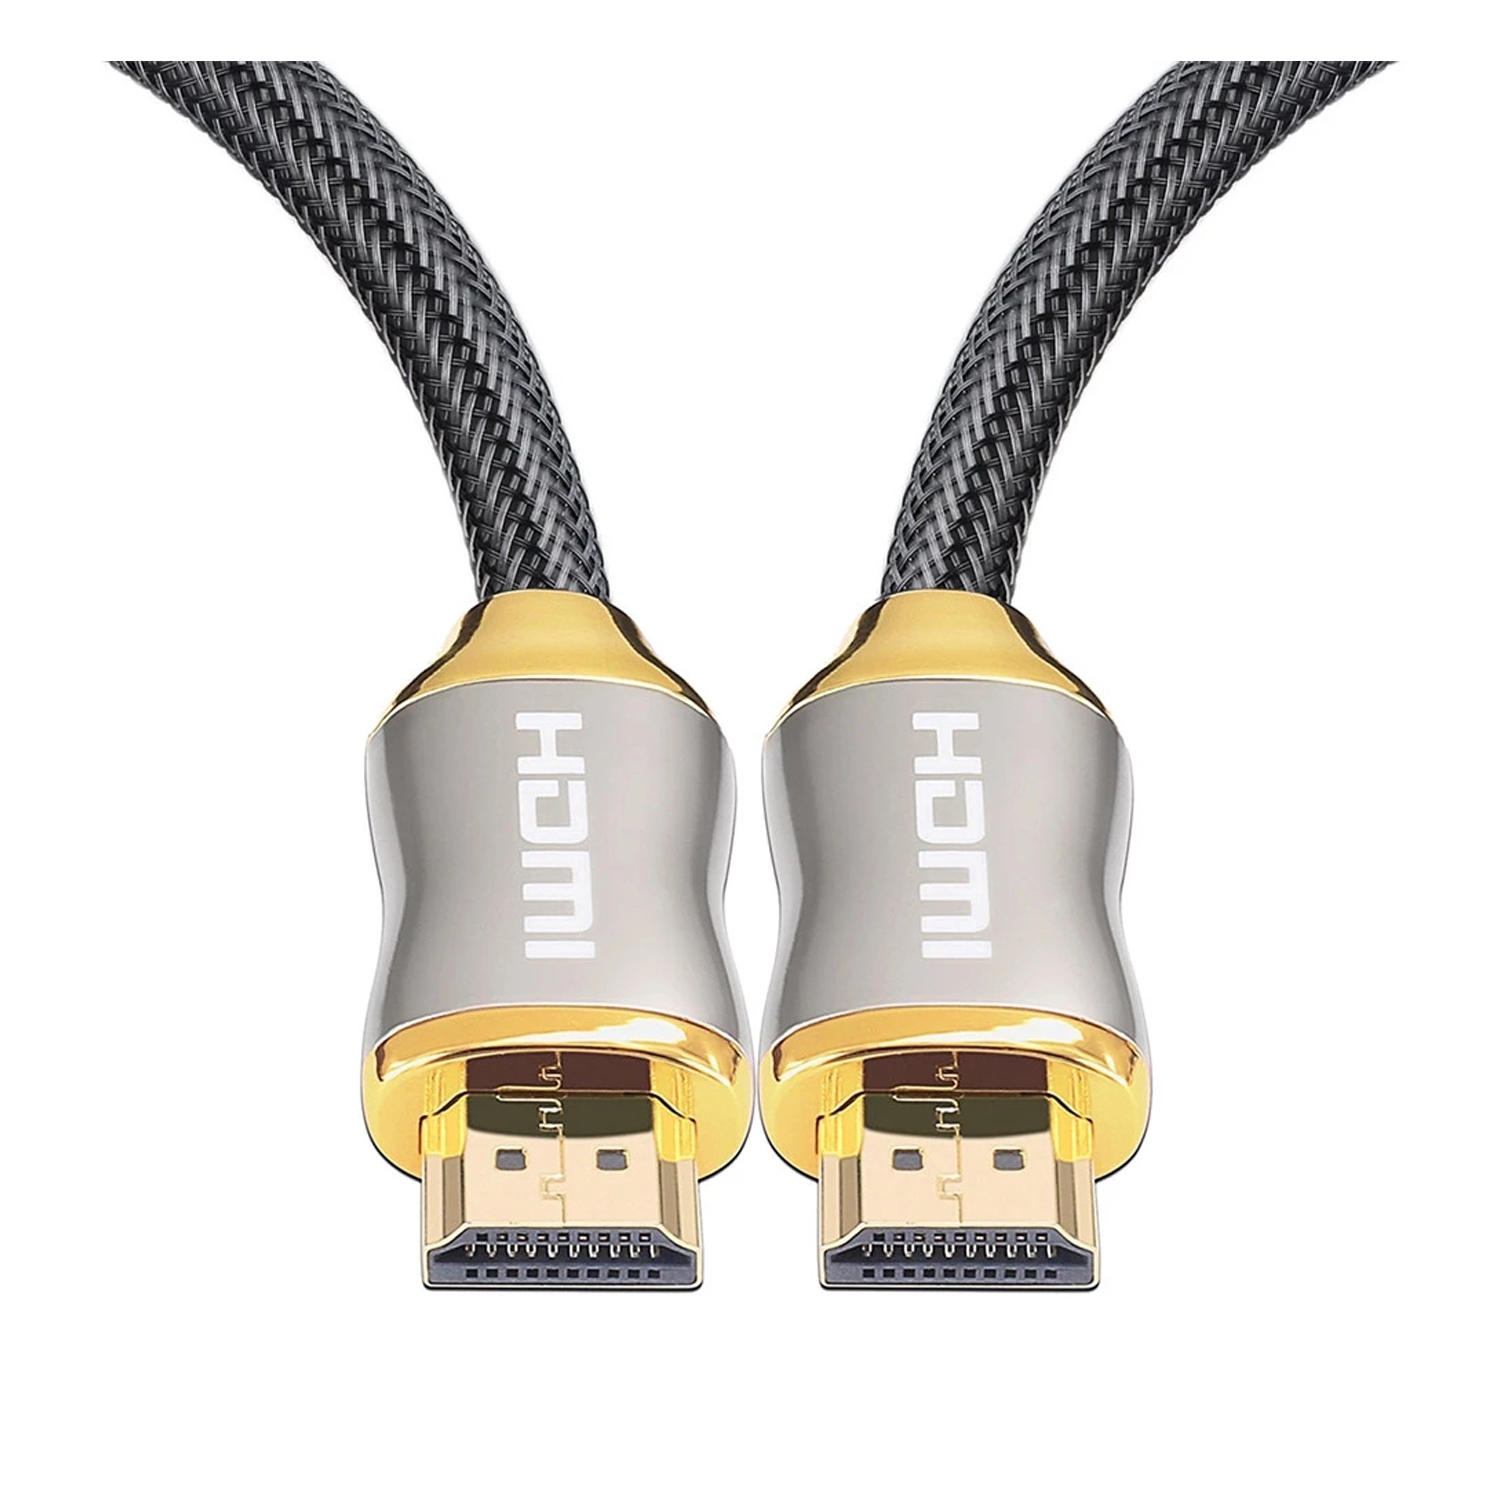 Saga 2.1 HDMI Cable 3 meter (10 Feet) 8K Ultra HD High-Speed GBPS lead | Supports 8K@60Hz, 4K@120Hz, 4320P, 3D Video Display, Braided Cord for Samsung LG Sony TCL PS5 PS4 TV Box